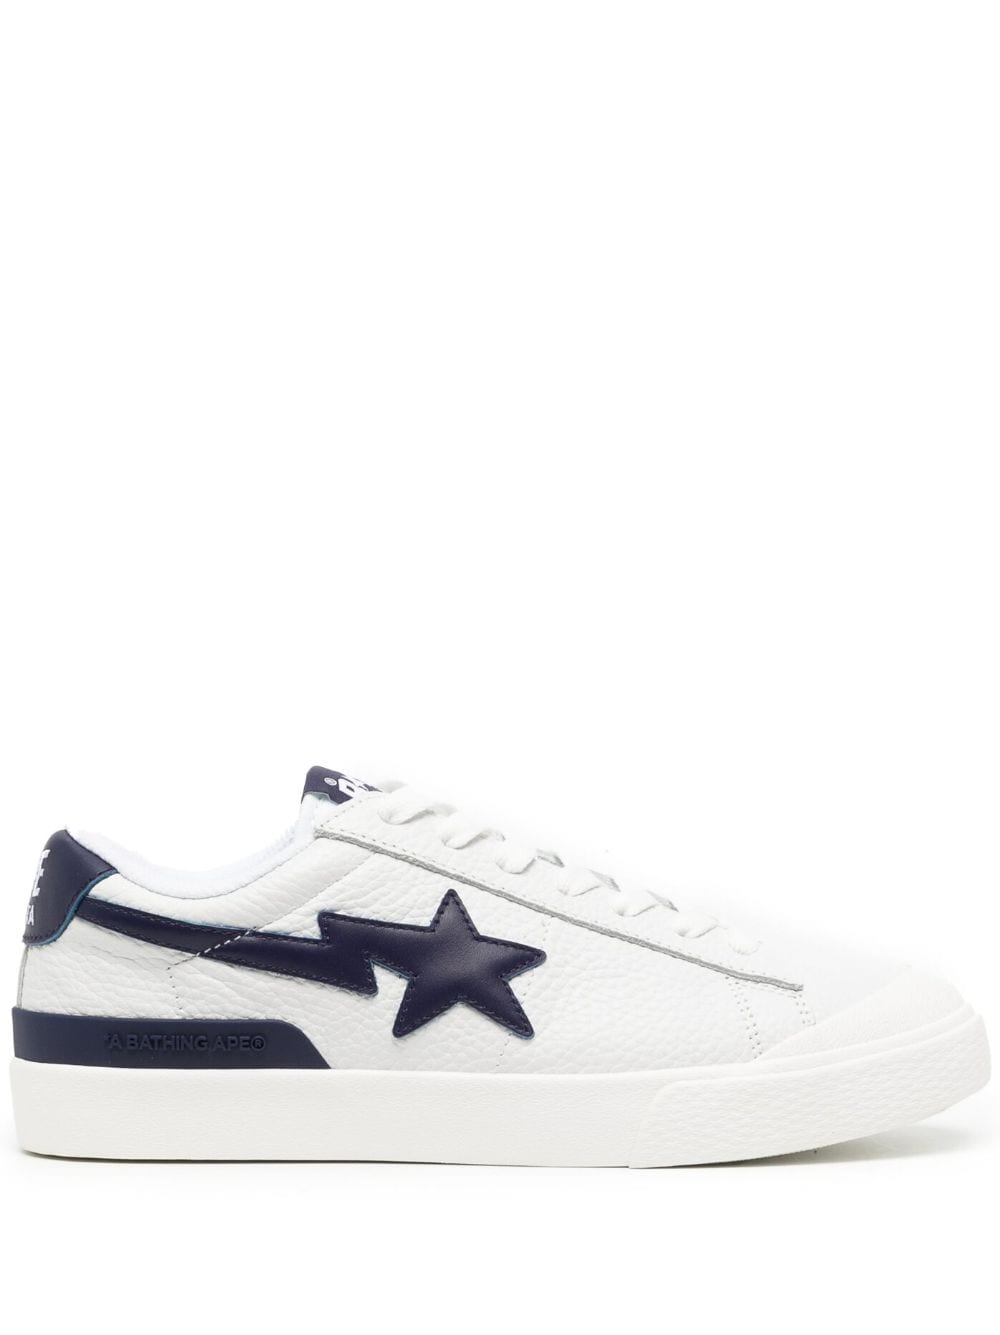 A BATHING APE® Mad Sta sneakers - White von A BATHING APE®